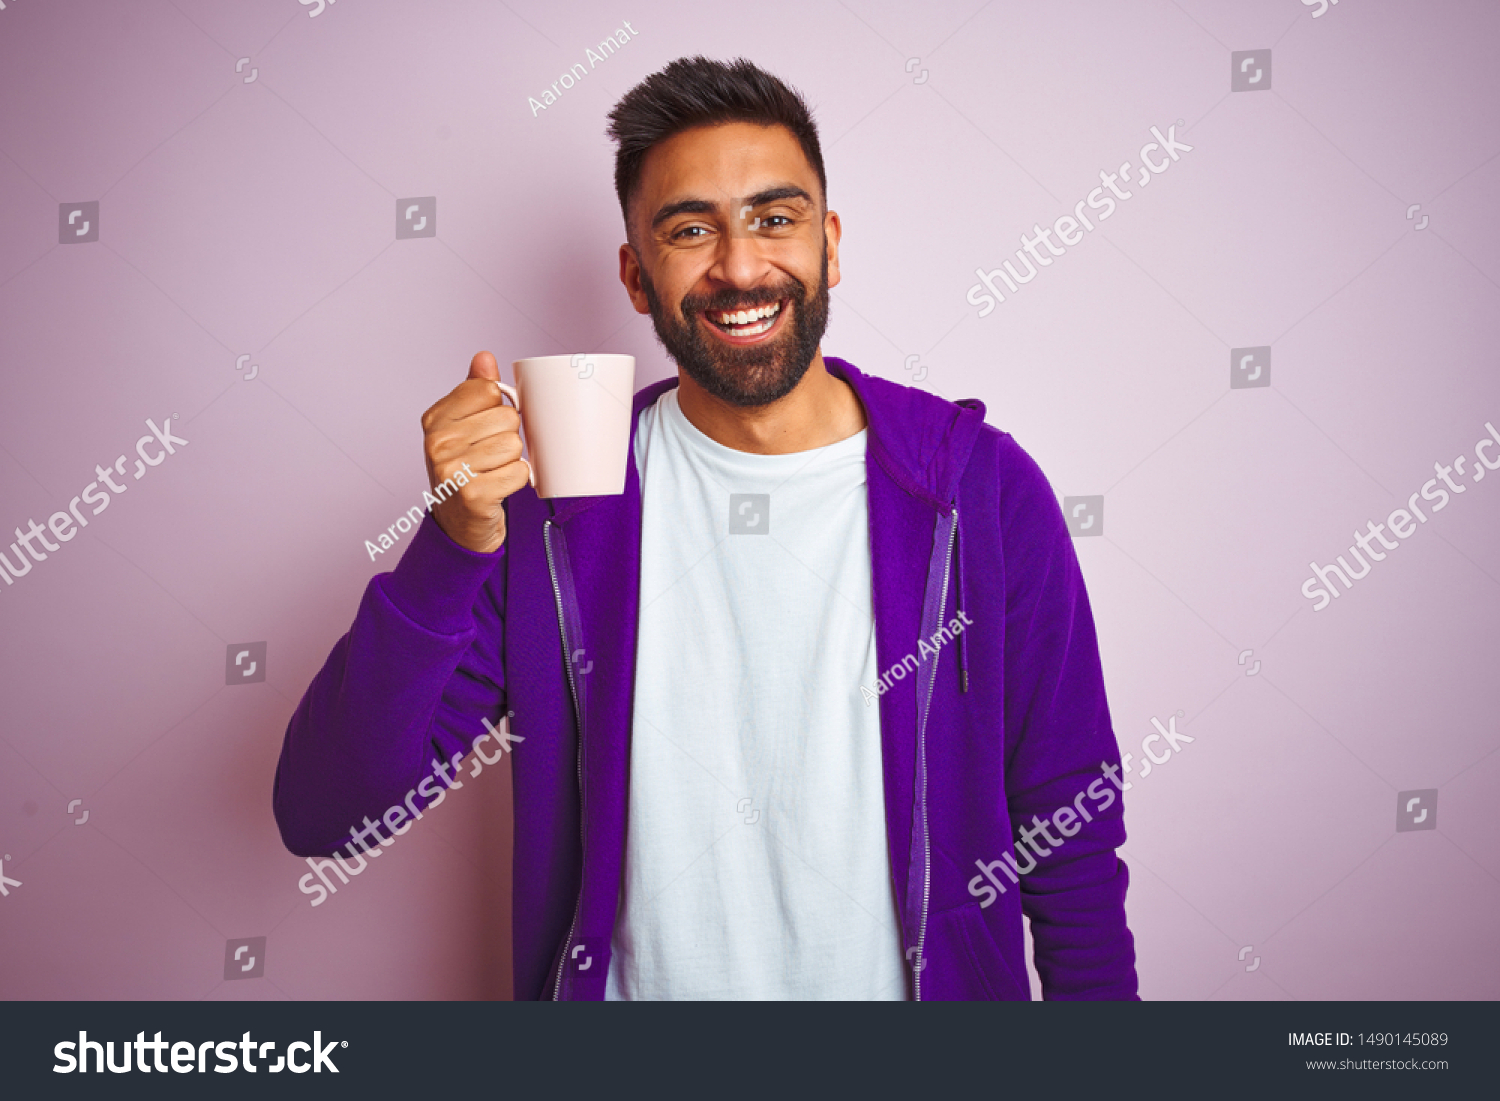 Indian man wearing purple sweatshirt drinking cup of coffee over isolated pink background with a happy face standing and smiling with a confident smile showing teeth #1490145089